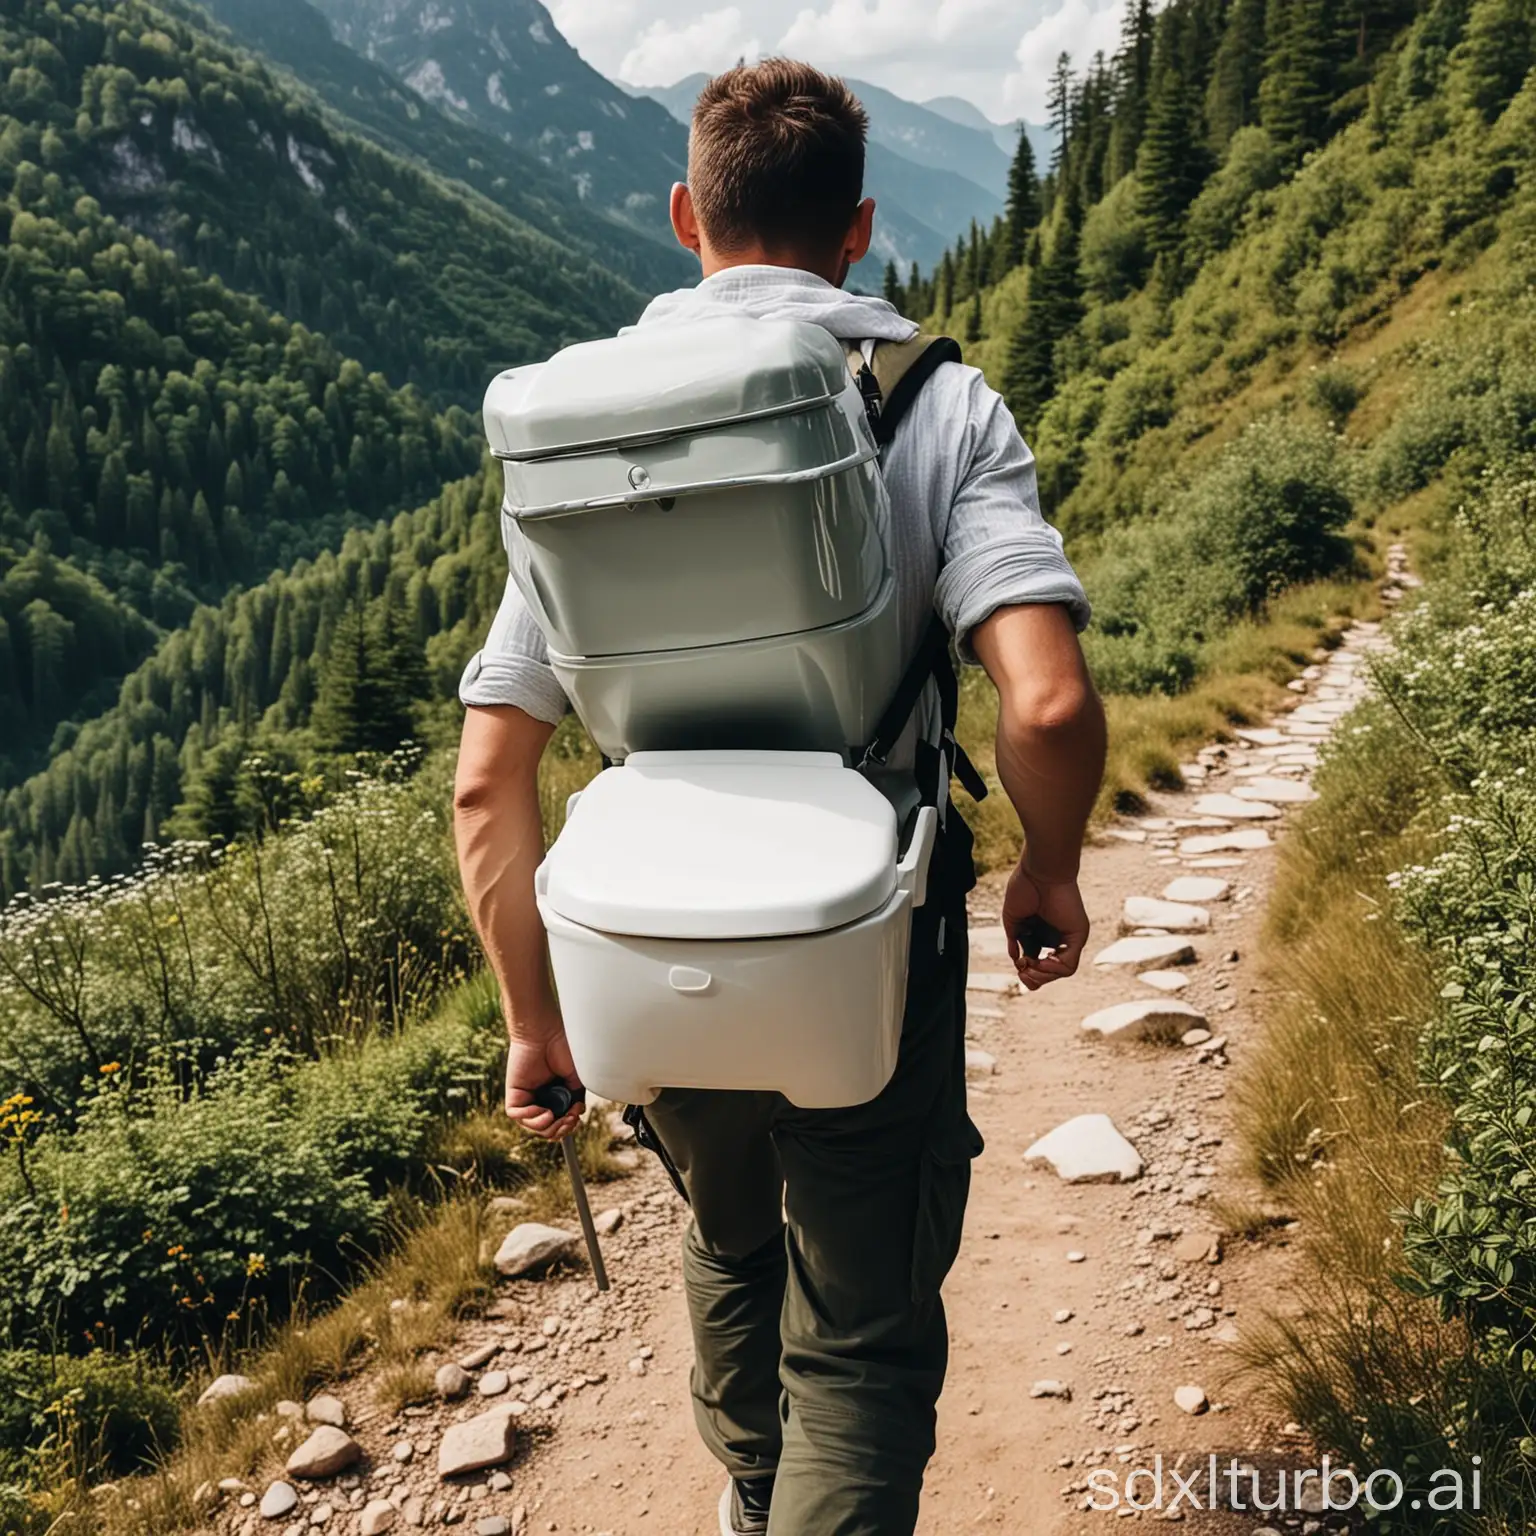 Man-Carrying-White-Porcelain-Toilet-on-Hiking-Adventure